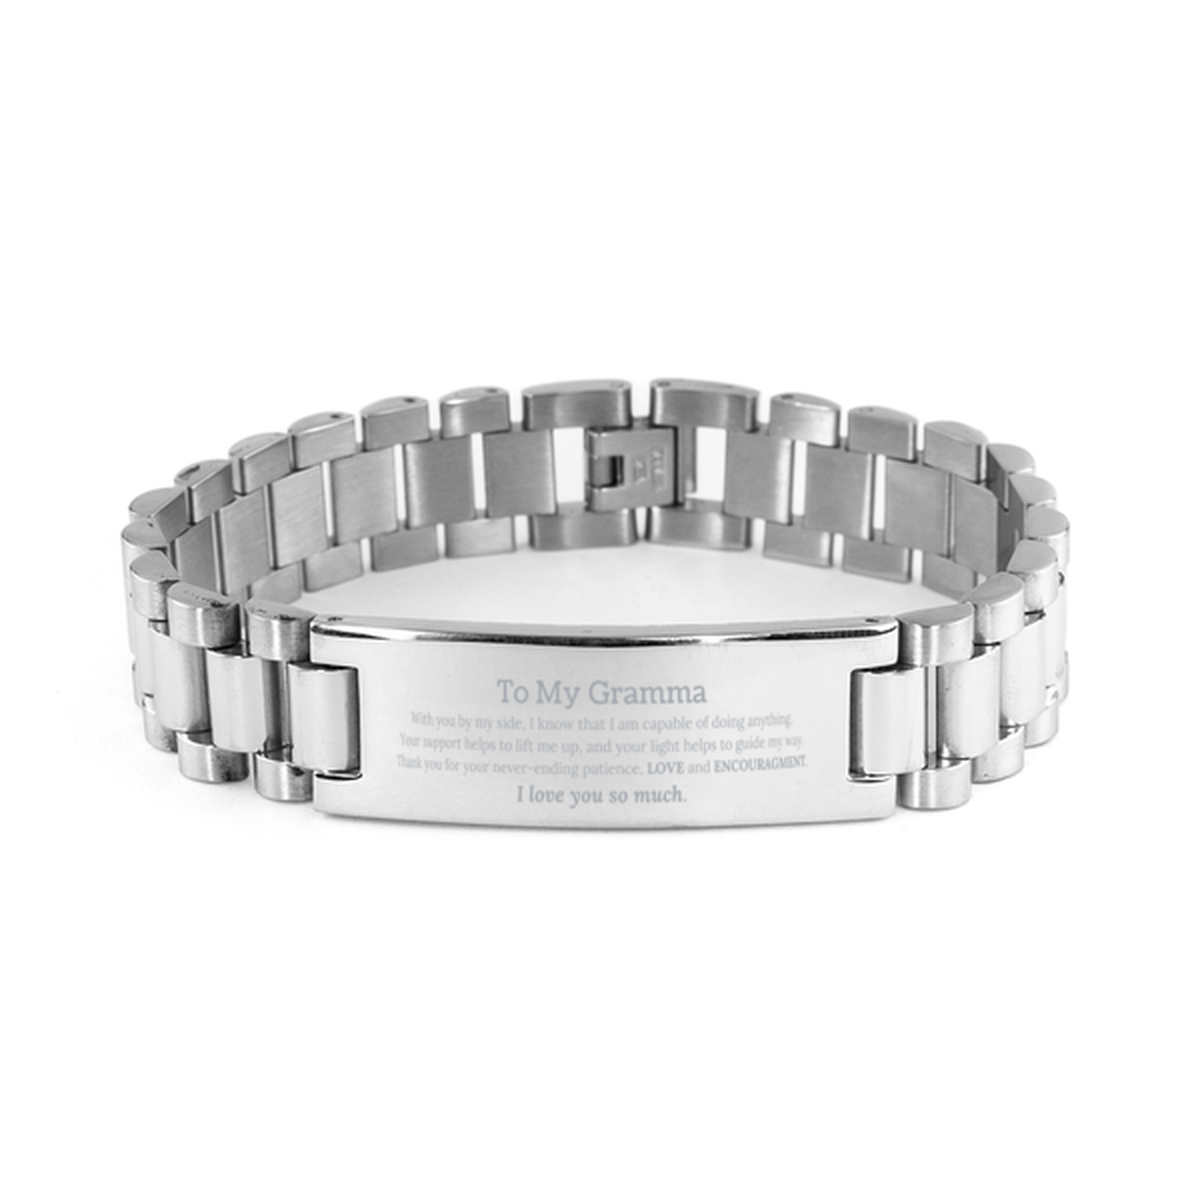 Appreciation Gramma Ladder Stainless Steel Bracelet Gifts, To My Gramma Birthday Christmas Wedding Keepsake Gifts for Gramma With you by my side, I know that I am capable of doing anything. I love you so much